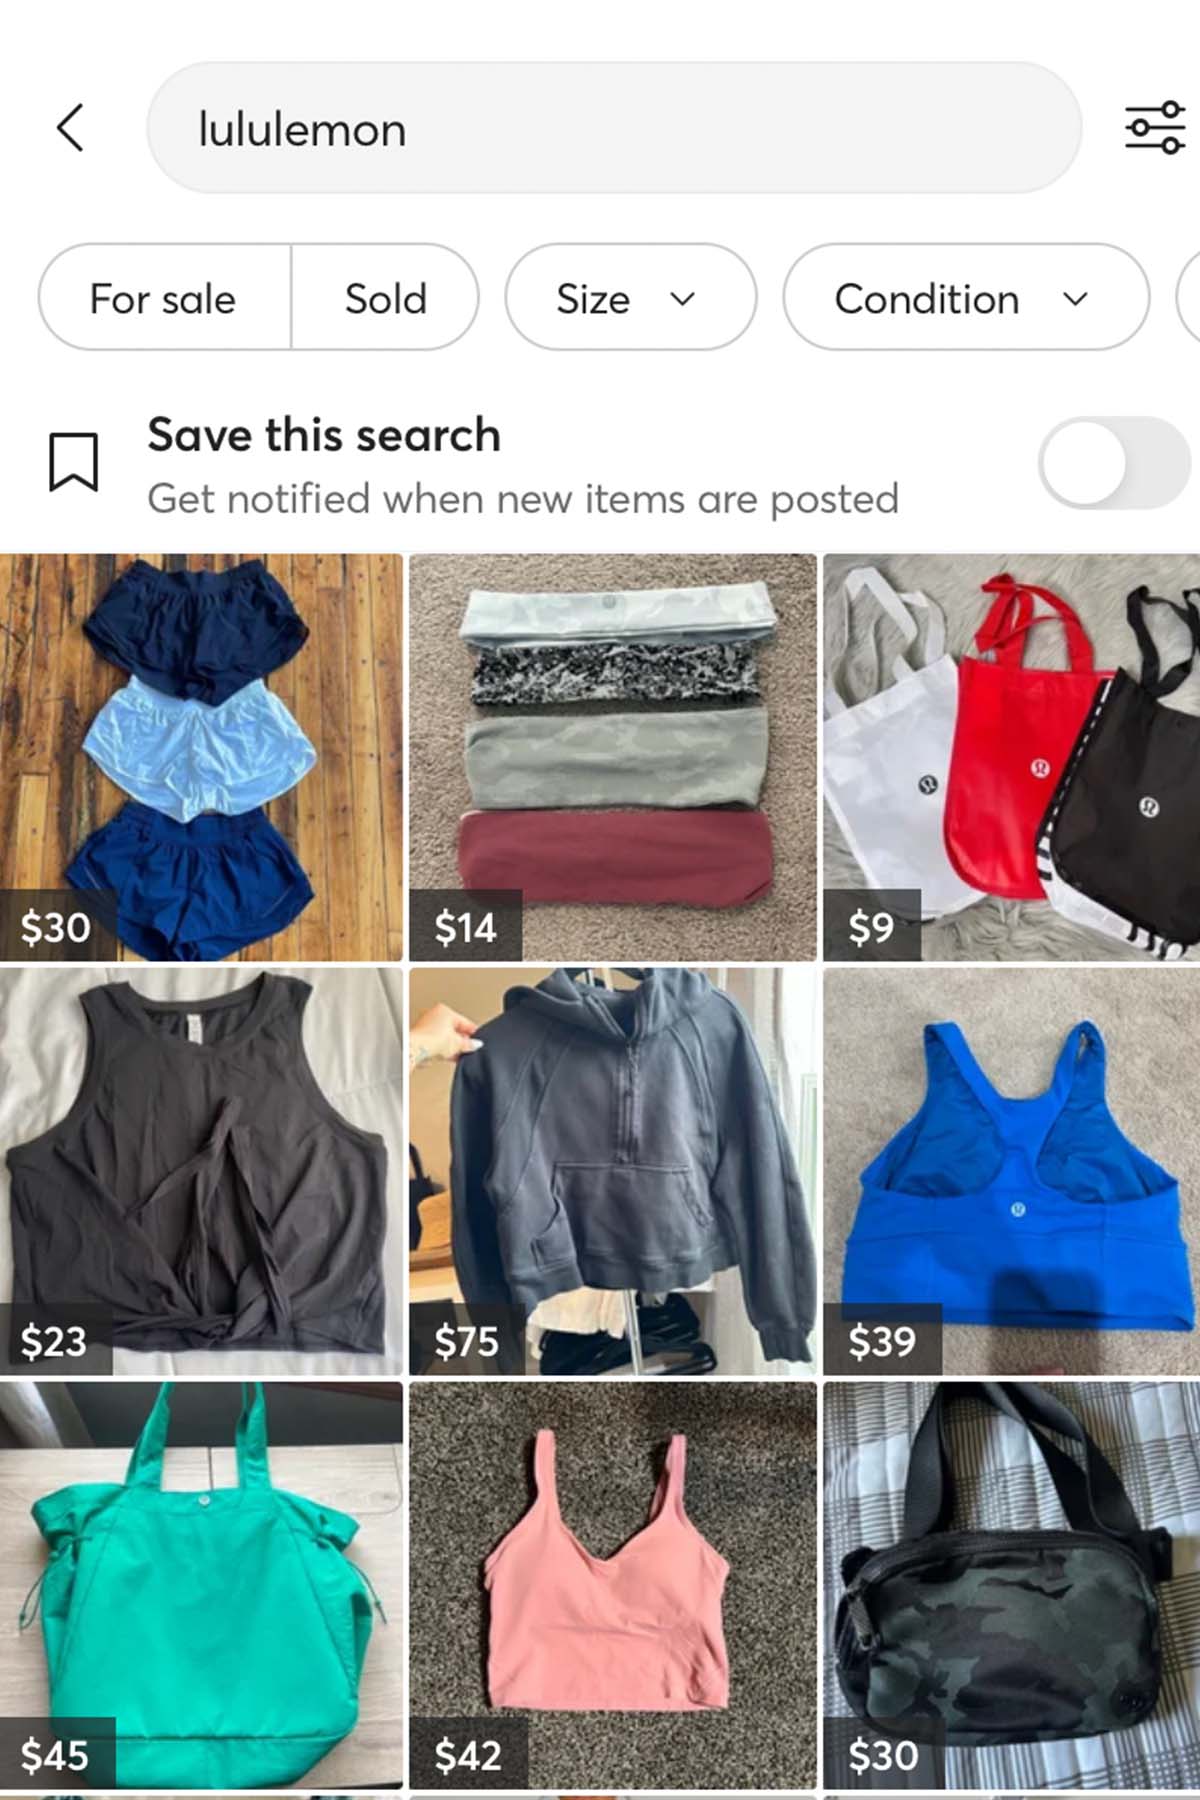 screenshot of the mercari app showing search results for lululemon.